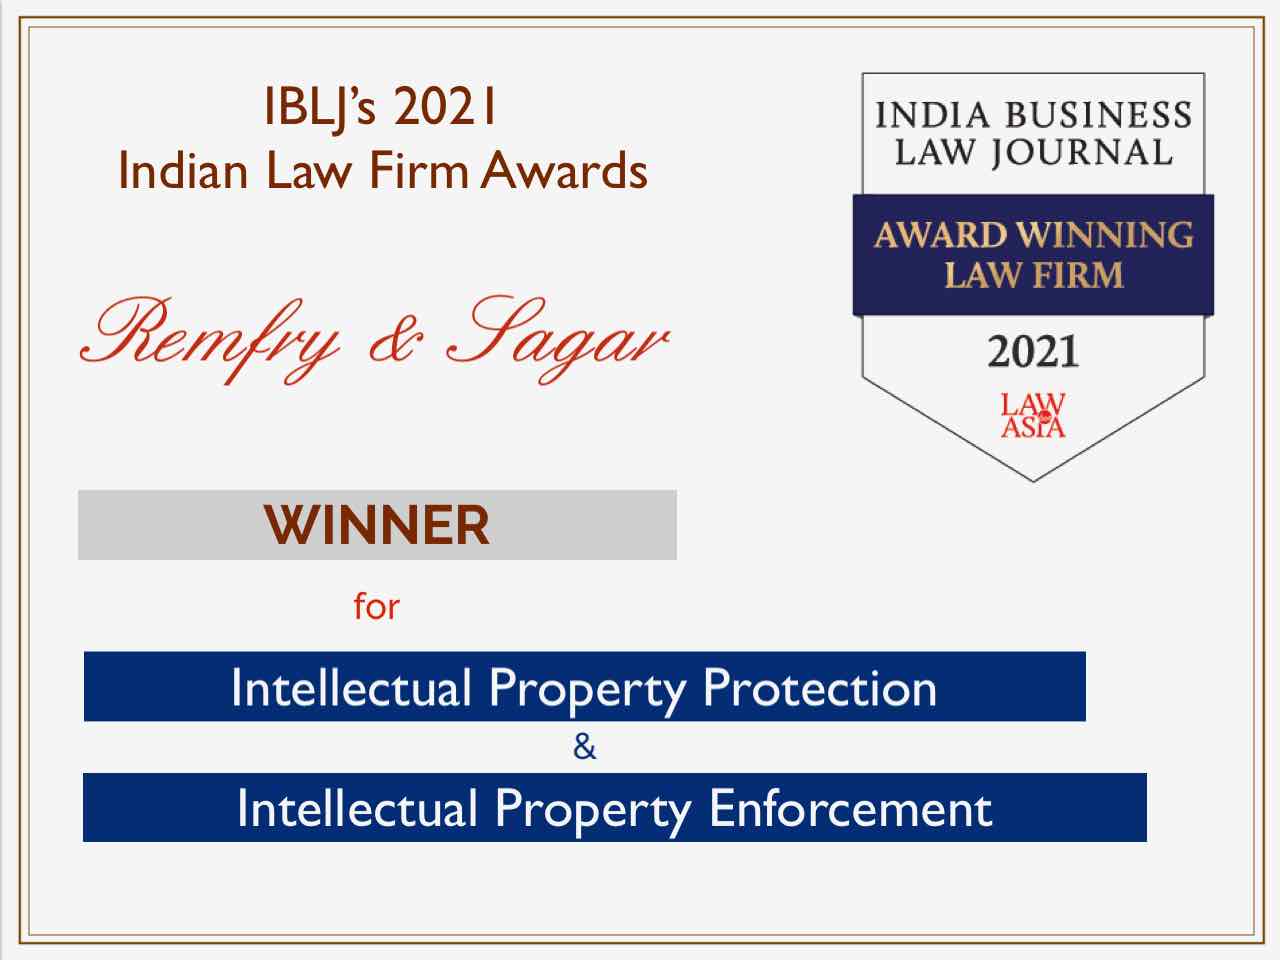 IBLJ’s 2021 Indian Law Firm Awards